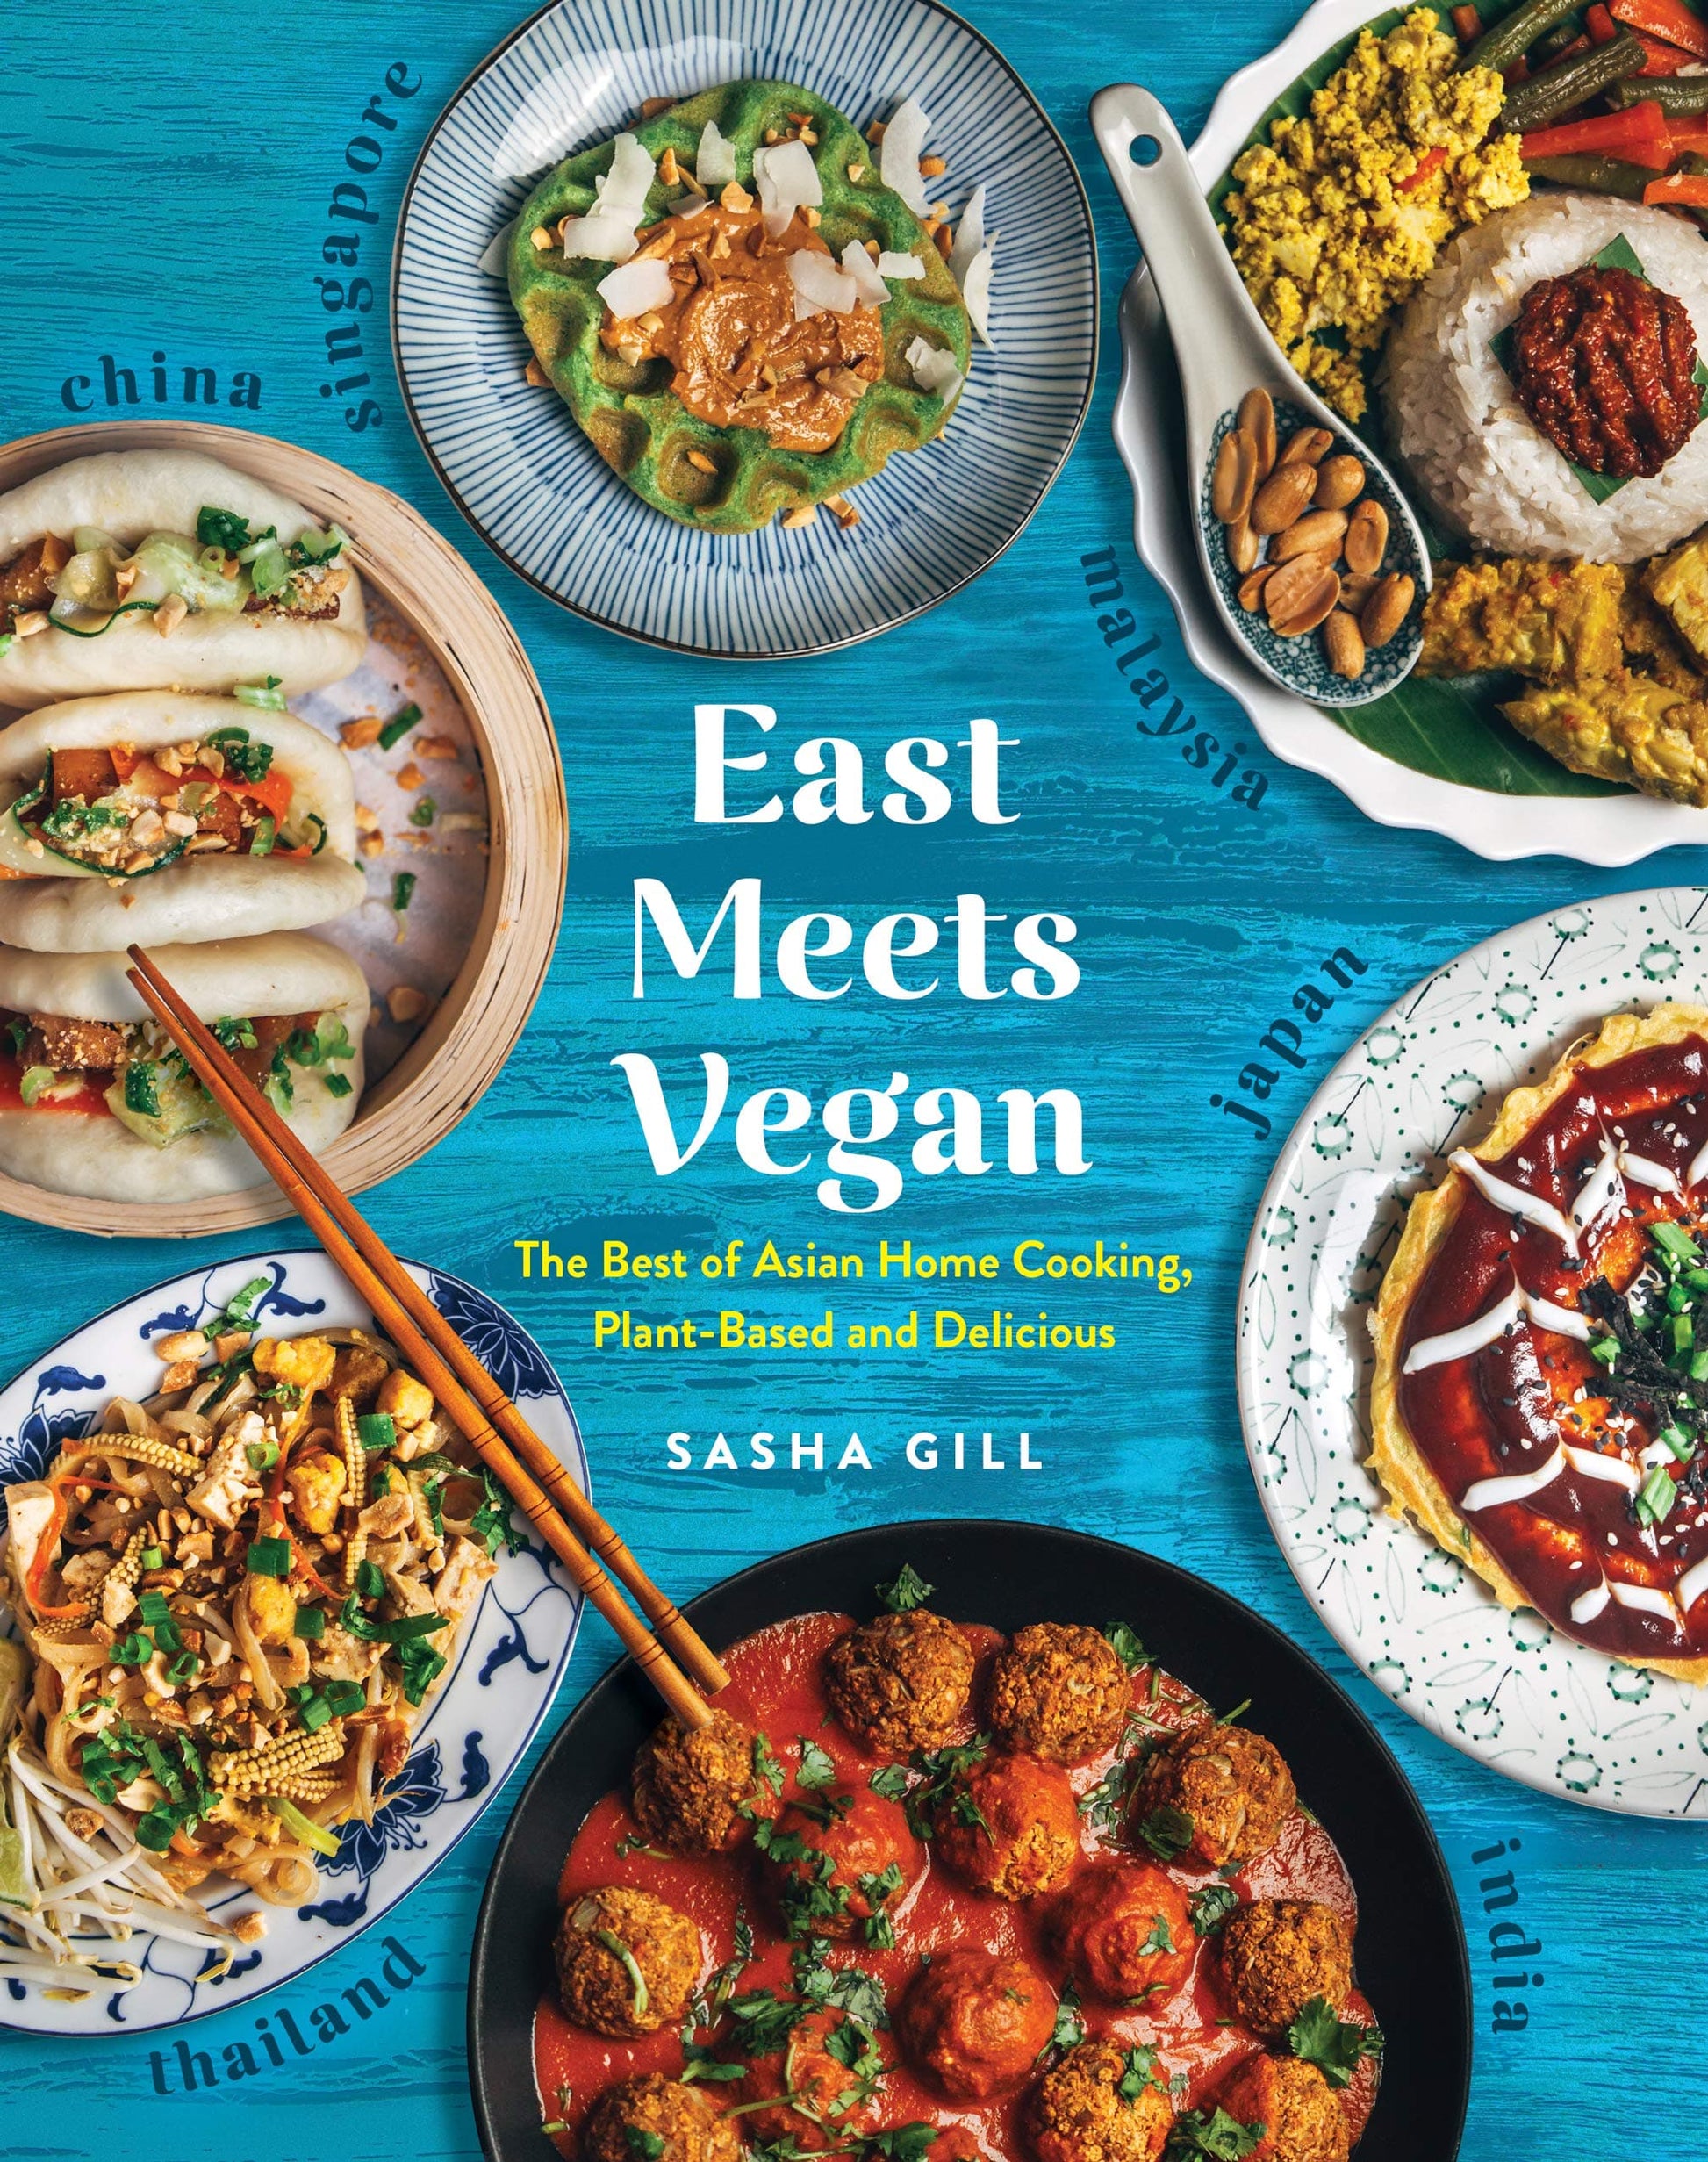 utp East Meets Vegan The Best of Asian Home Cooking, Plant-Based and Delicious by By Sasha Gill